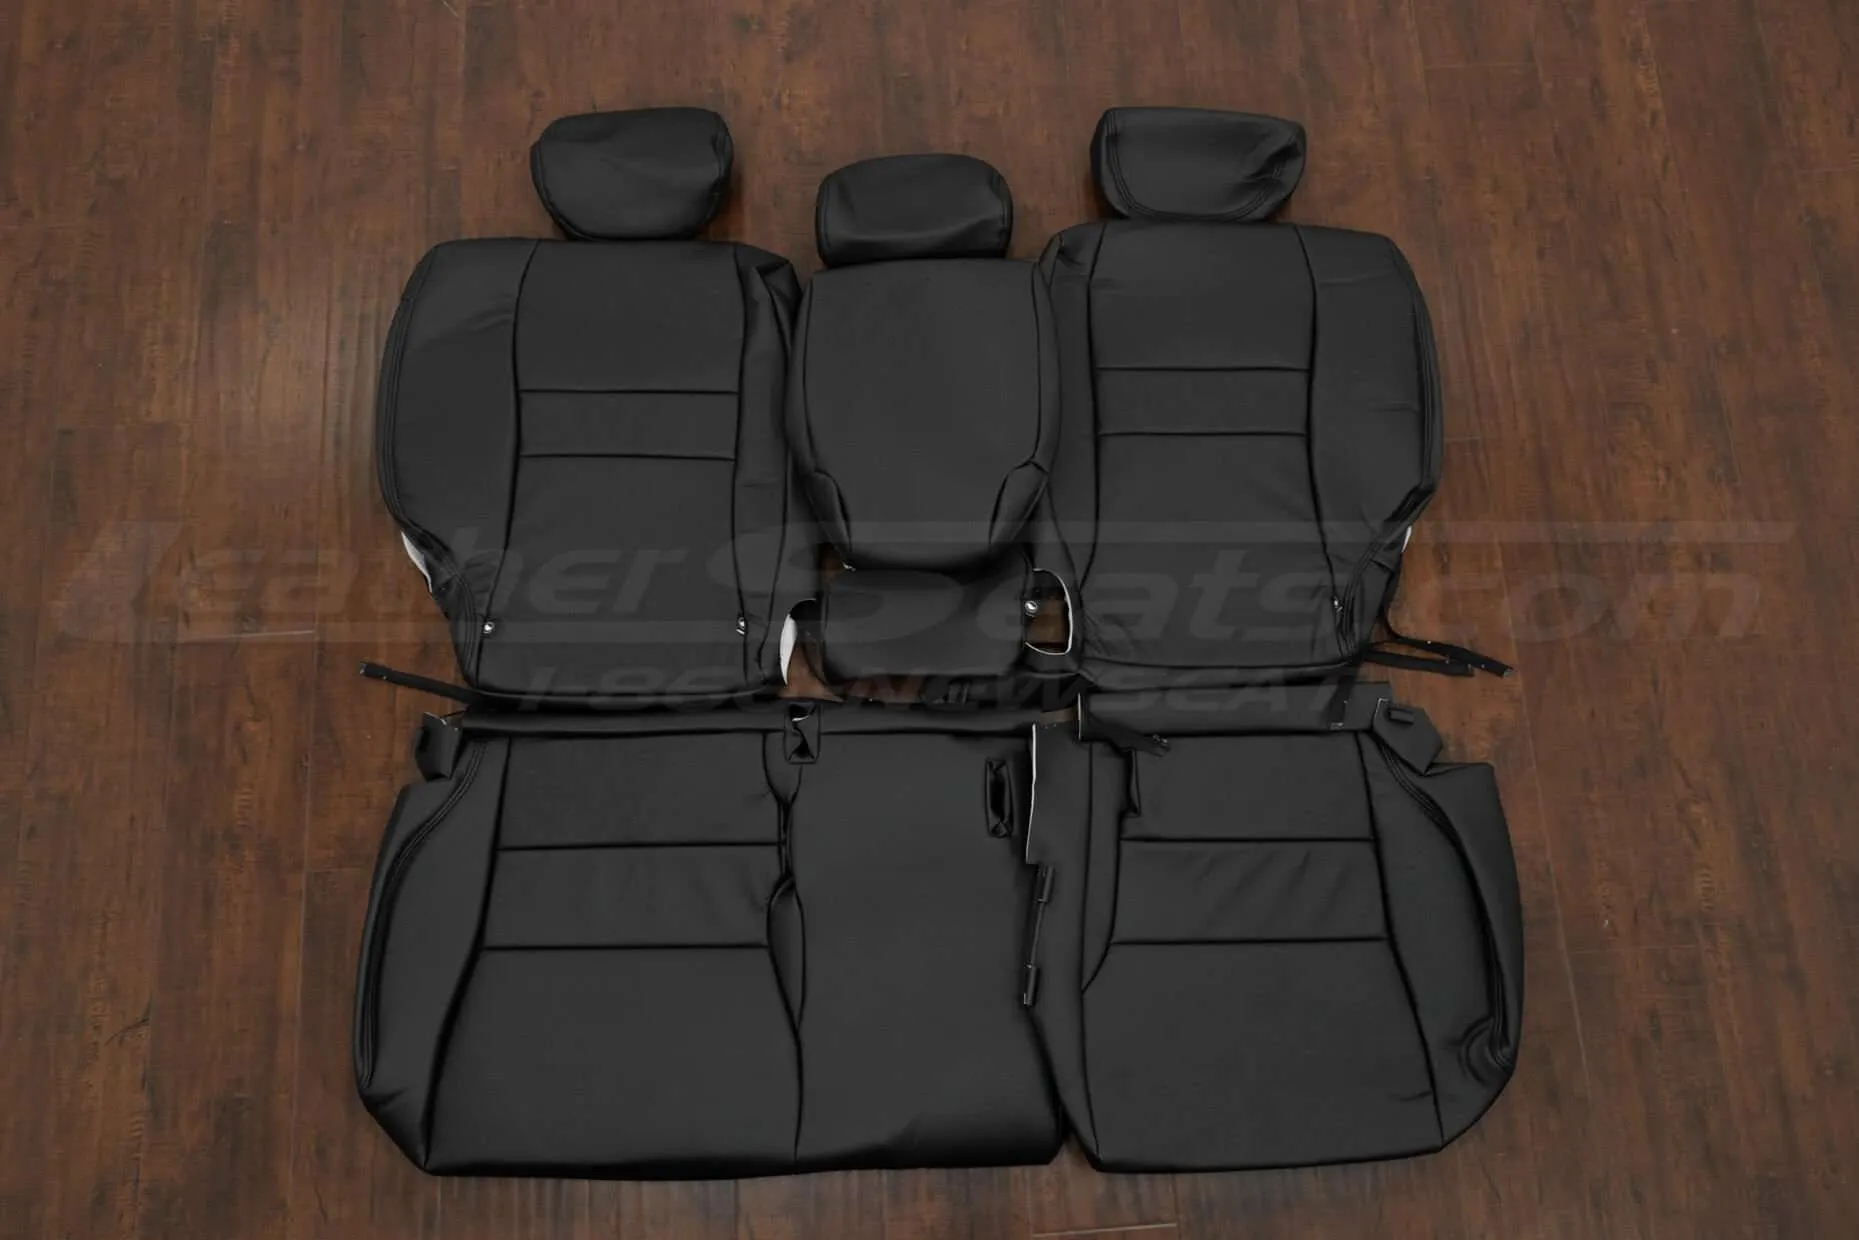 Honda CR-C Leather Sea Upholstery Kit - Black - Rear seat upholstery with 2 piece armrest